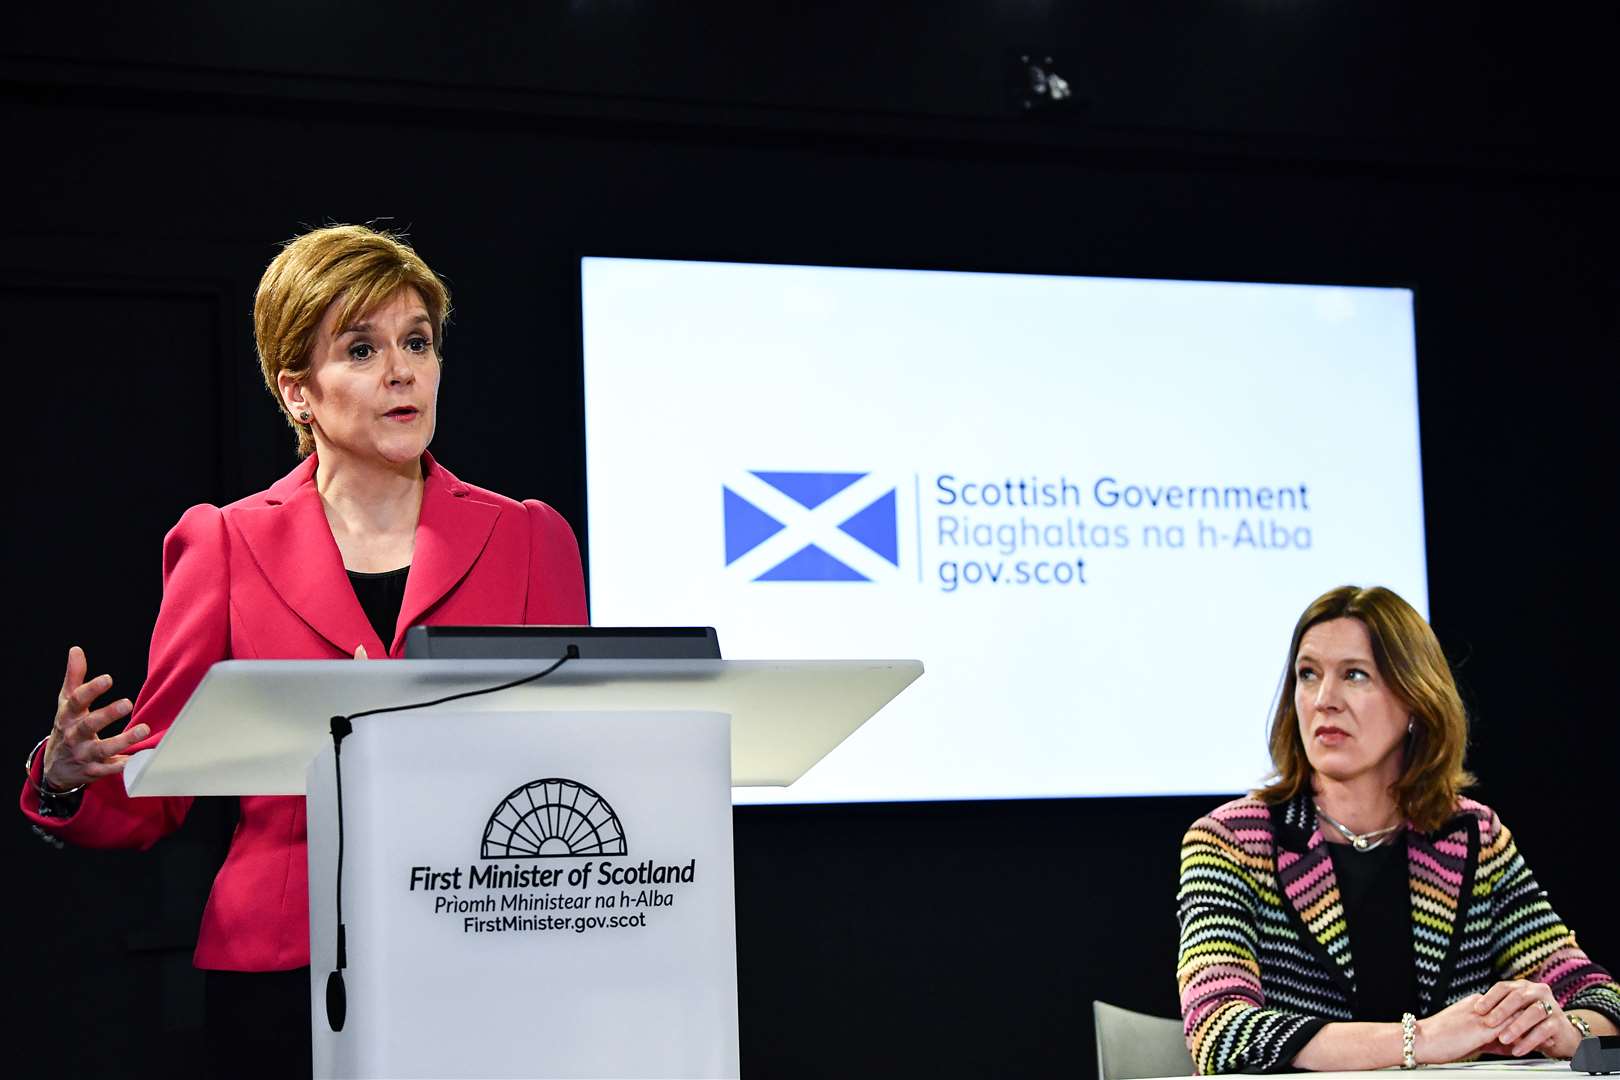 Scotland’s First Minister Nicola Sturgeon said Chief Medical Officer Dr Catherine Calderwood had completed ‘transformational’ work in the role (Jeff J Mitchell/PA)